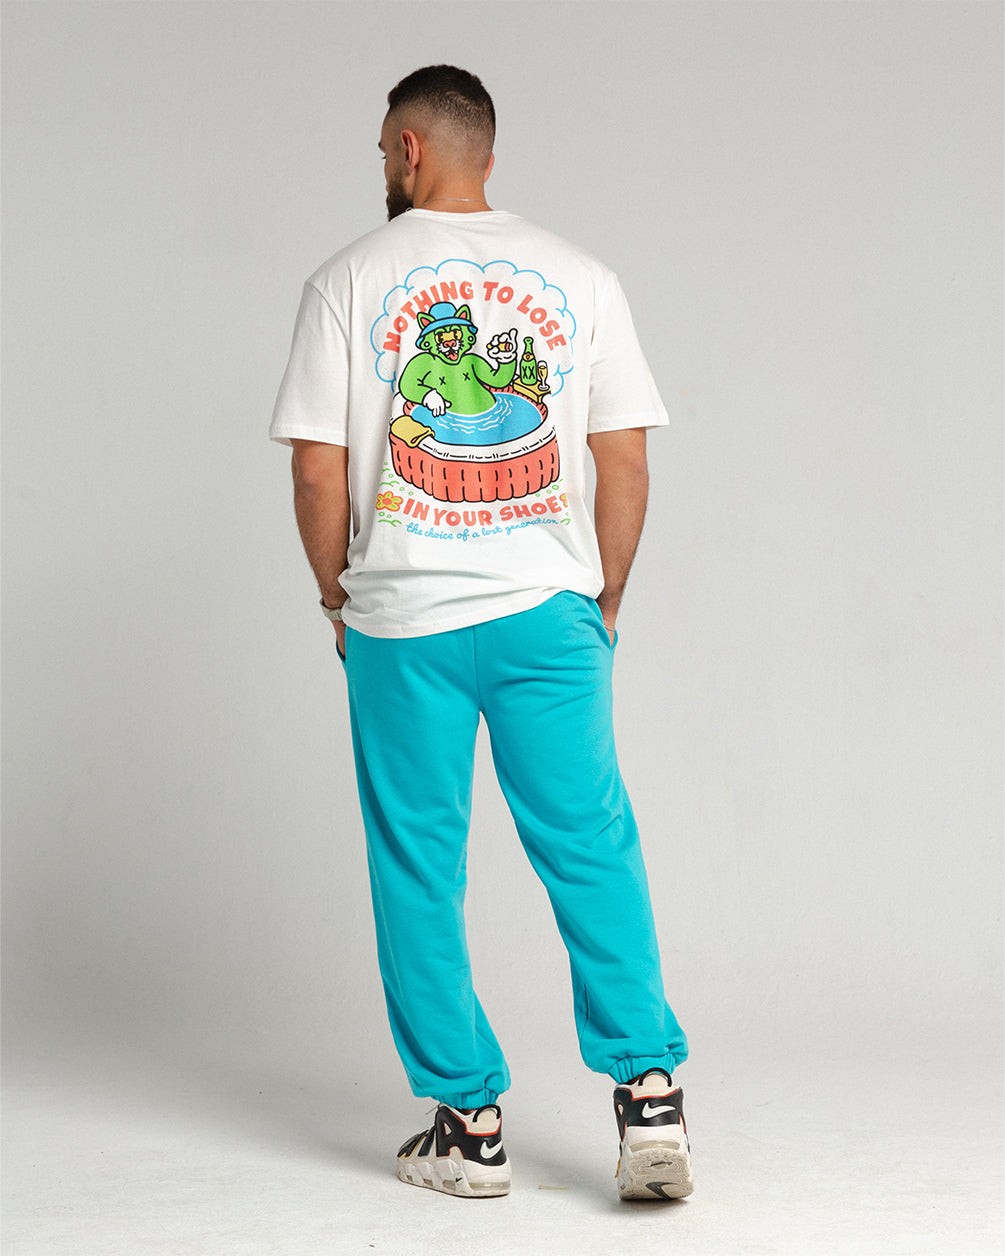 Turquoise Swants (Sweatpants) Swants IN YOUR SHOE XL 